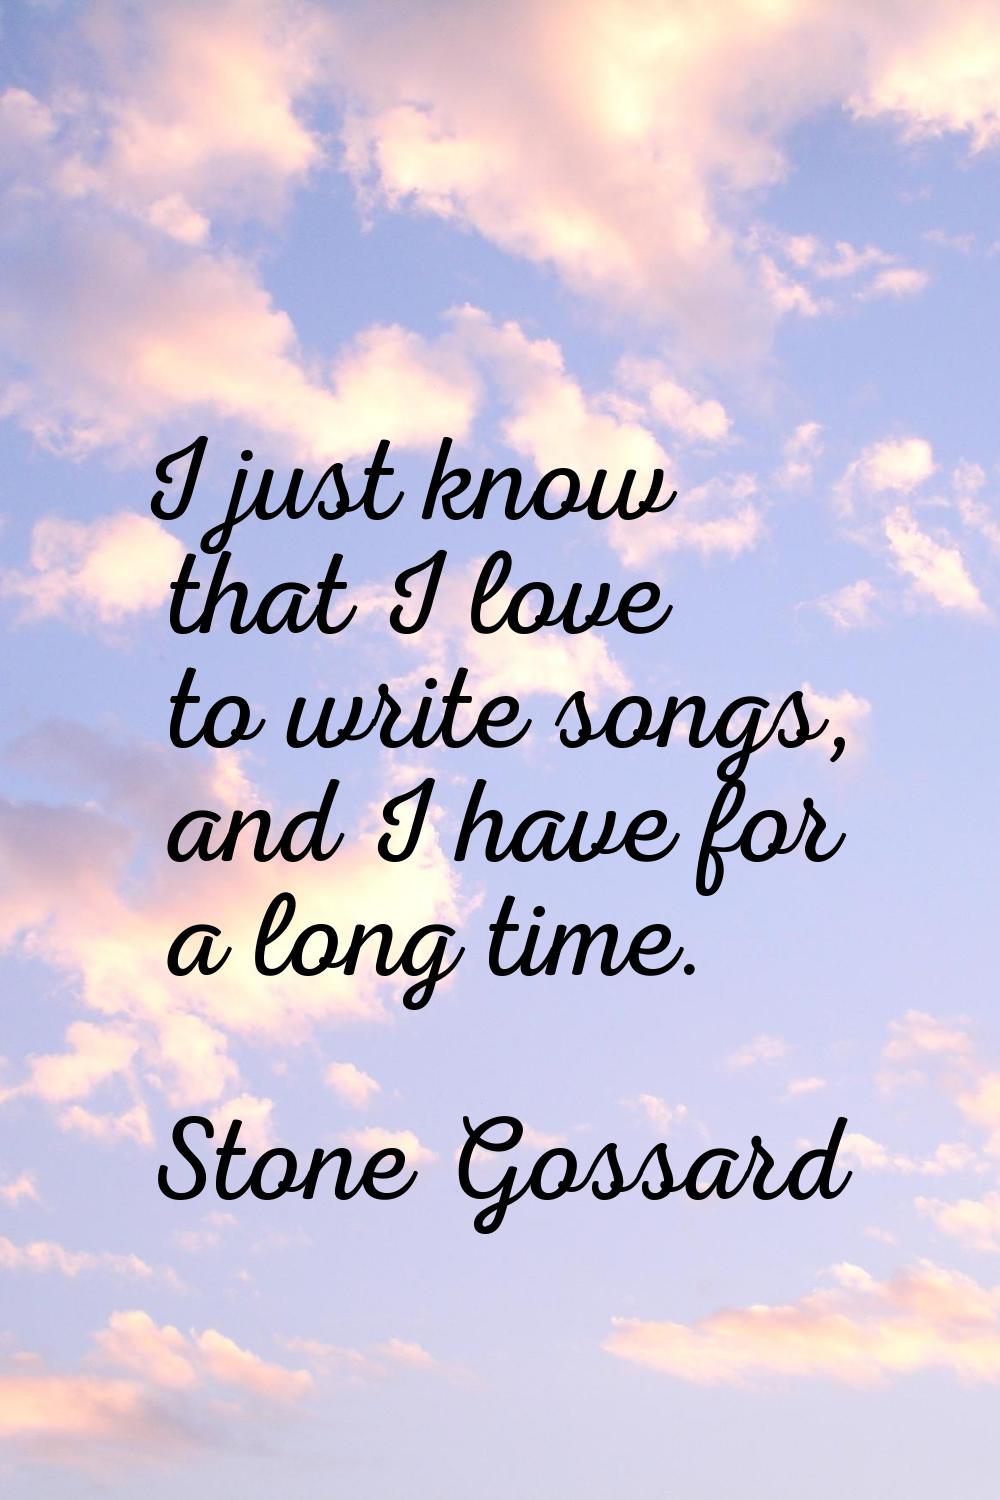 I just know that I love to write songs, and I have for a long time.